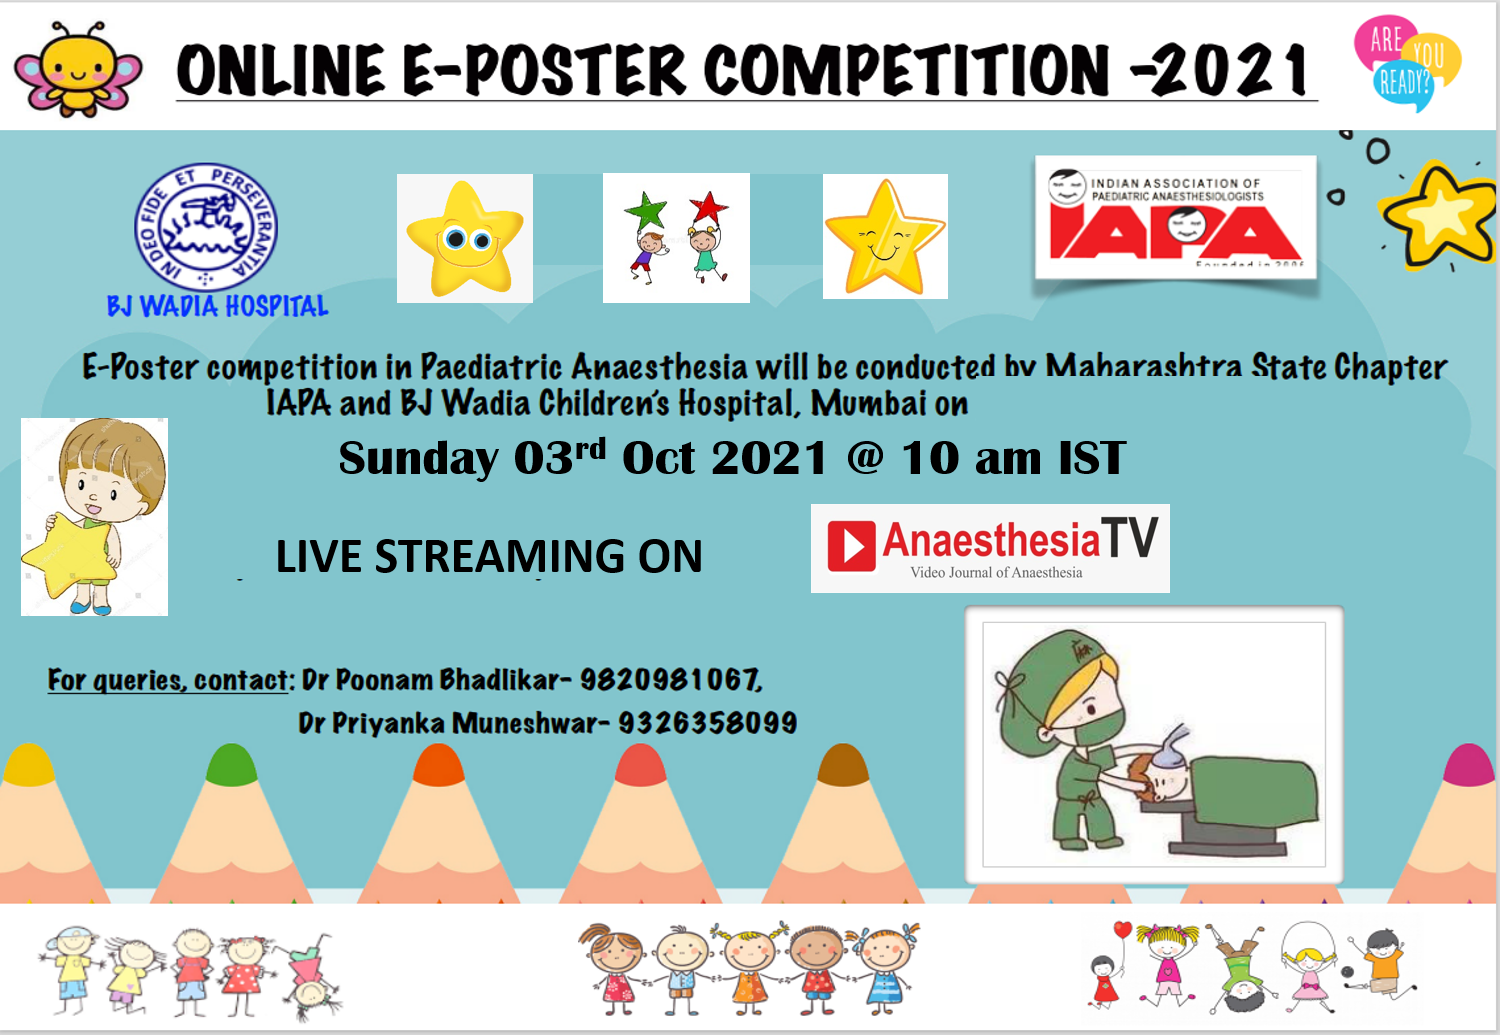 ONLINE E-POSTER COMPETITION in PAEDIATRIC ANAESTHESIA – 2021